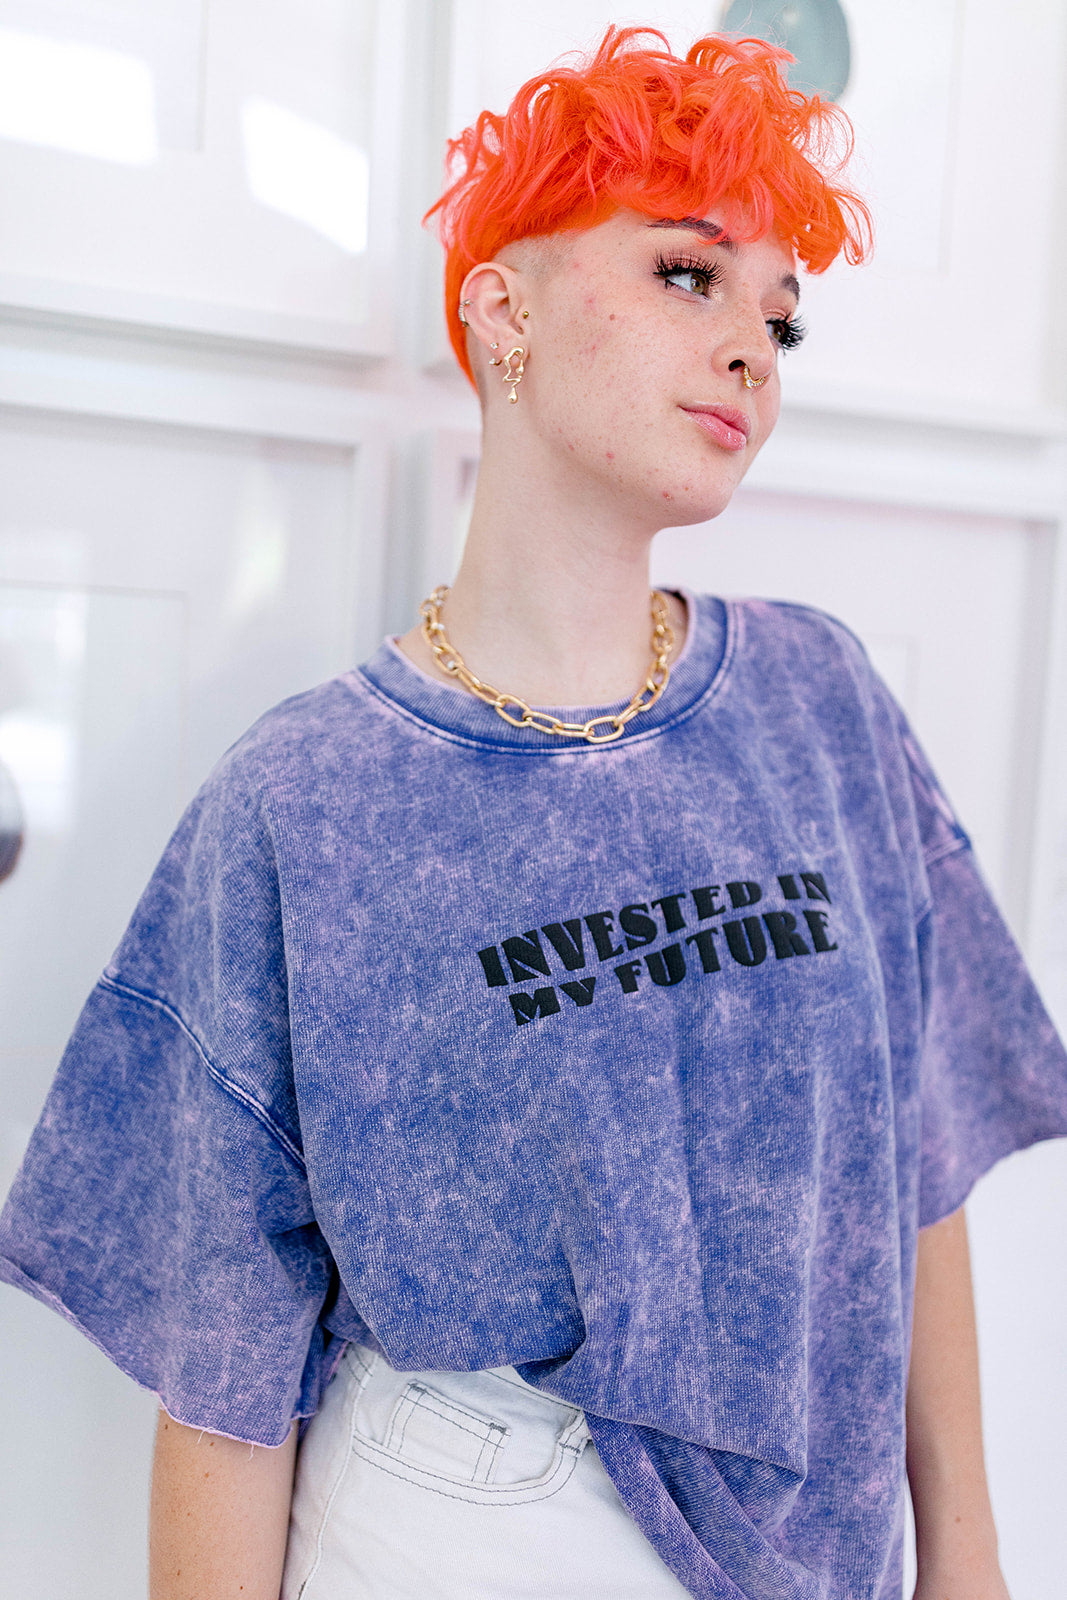 TABY ORIGINAL: DON’T WASTE YOUR TALENT BOYFRIEND TEE IN BLUEBERRY ACID WASH + EXTREME PUFF***